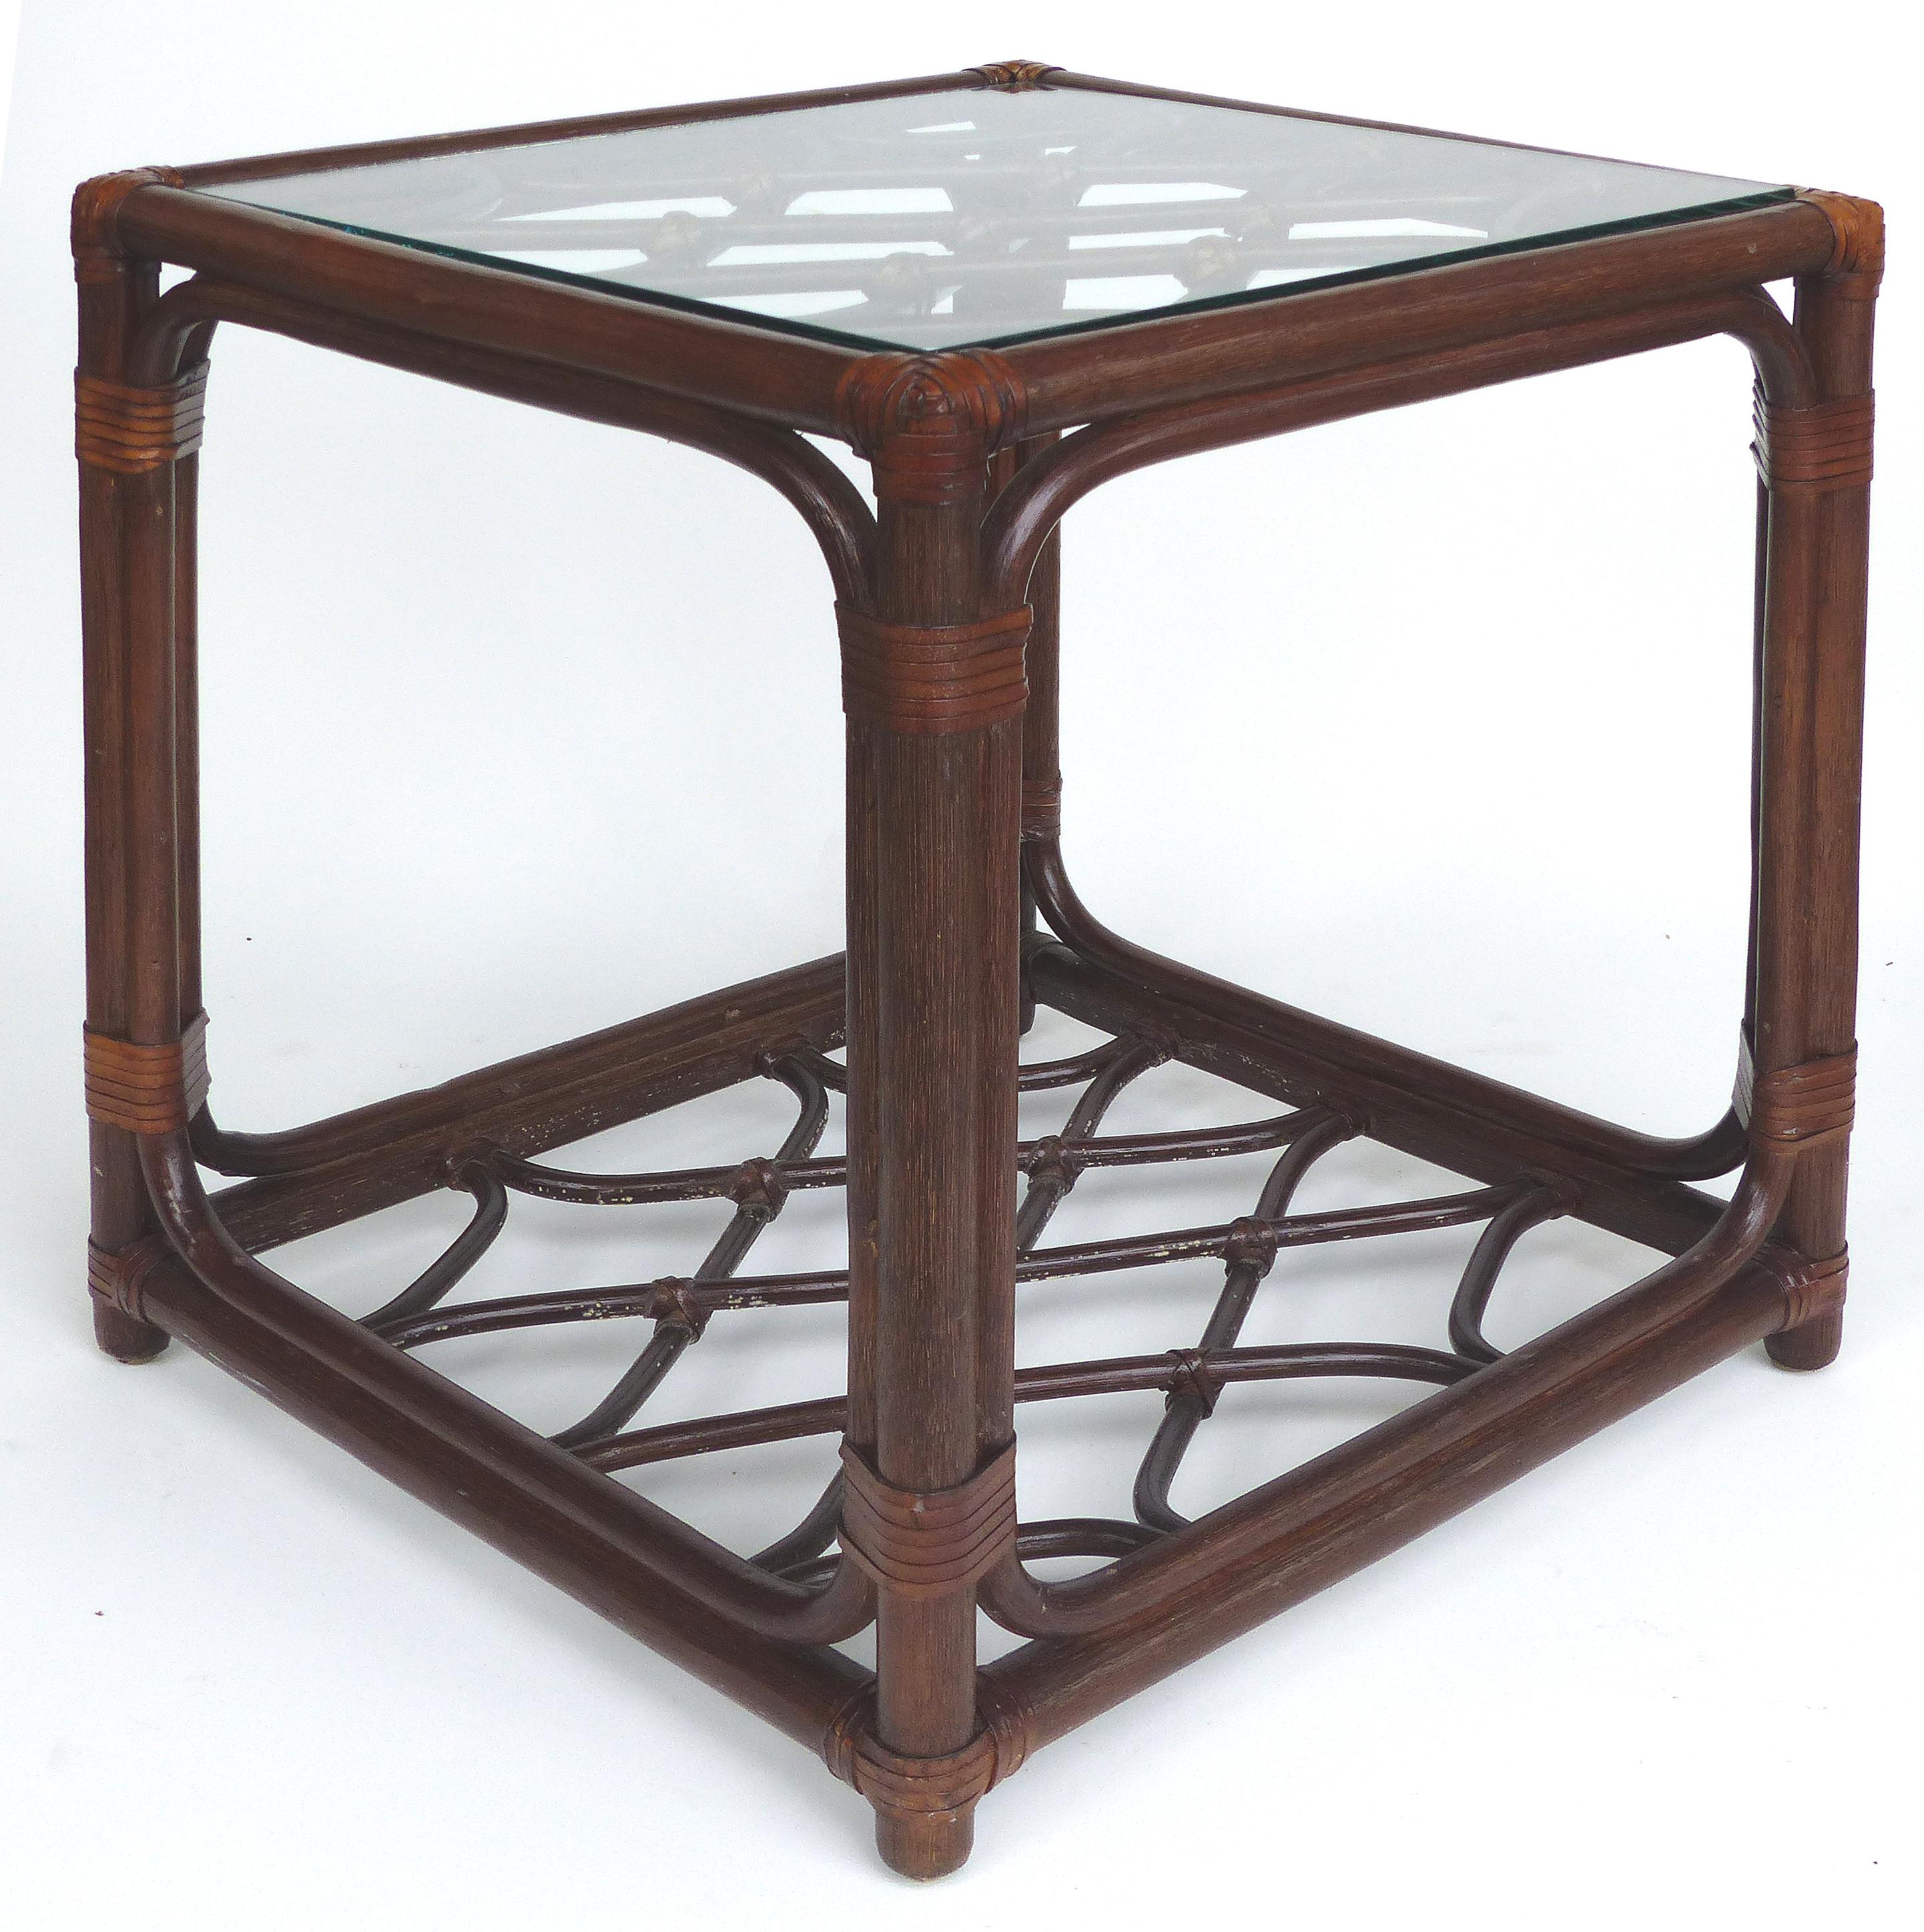 Rattan Side Table, Criss Cross Design, Leather Strapping attributed to McGuire 7